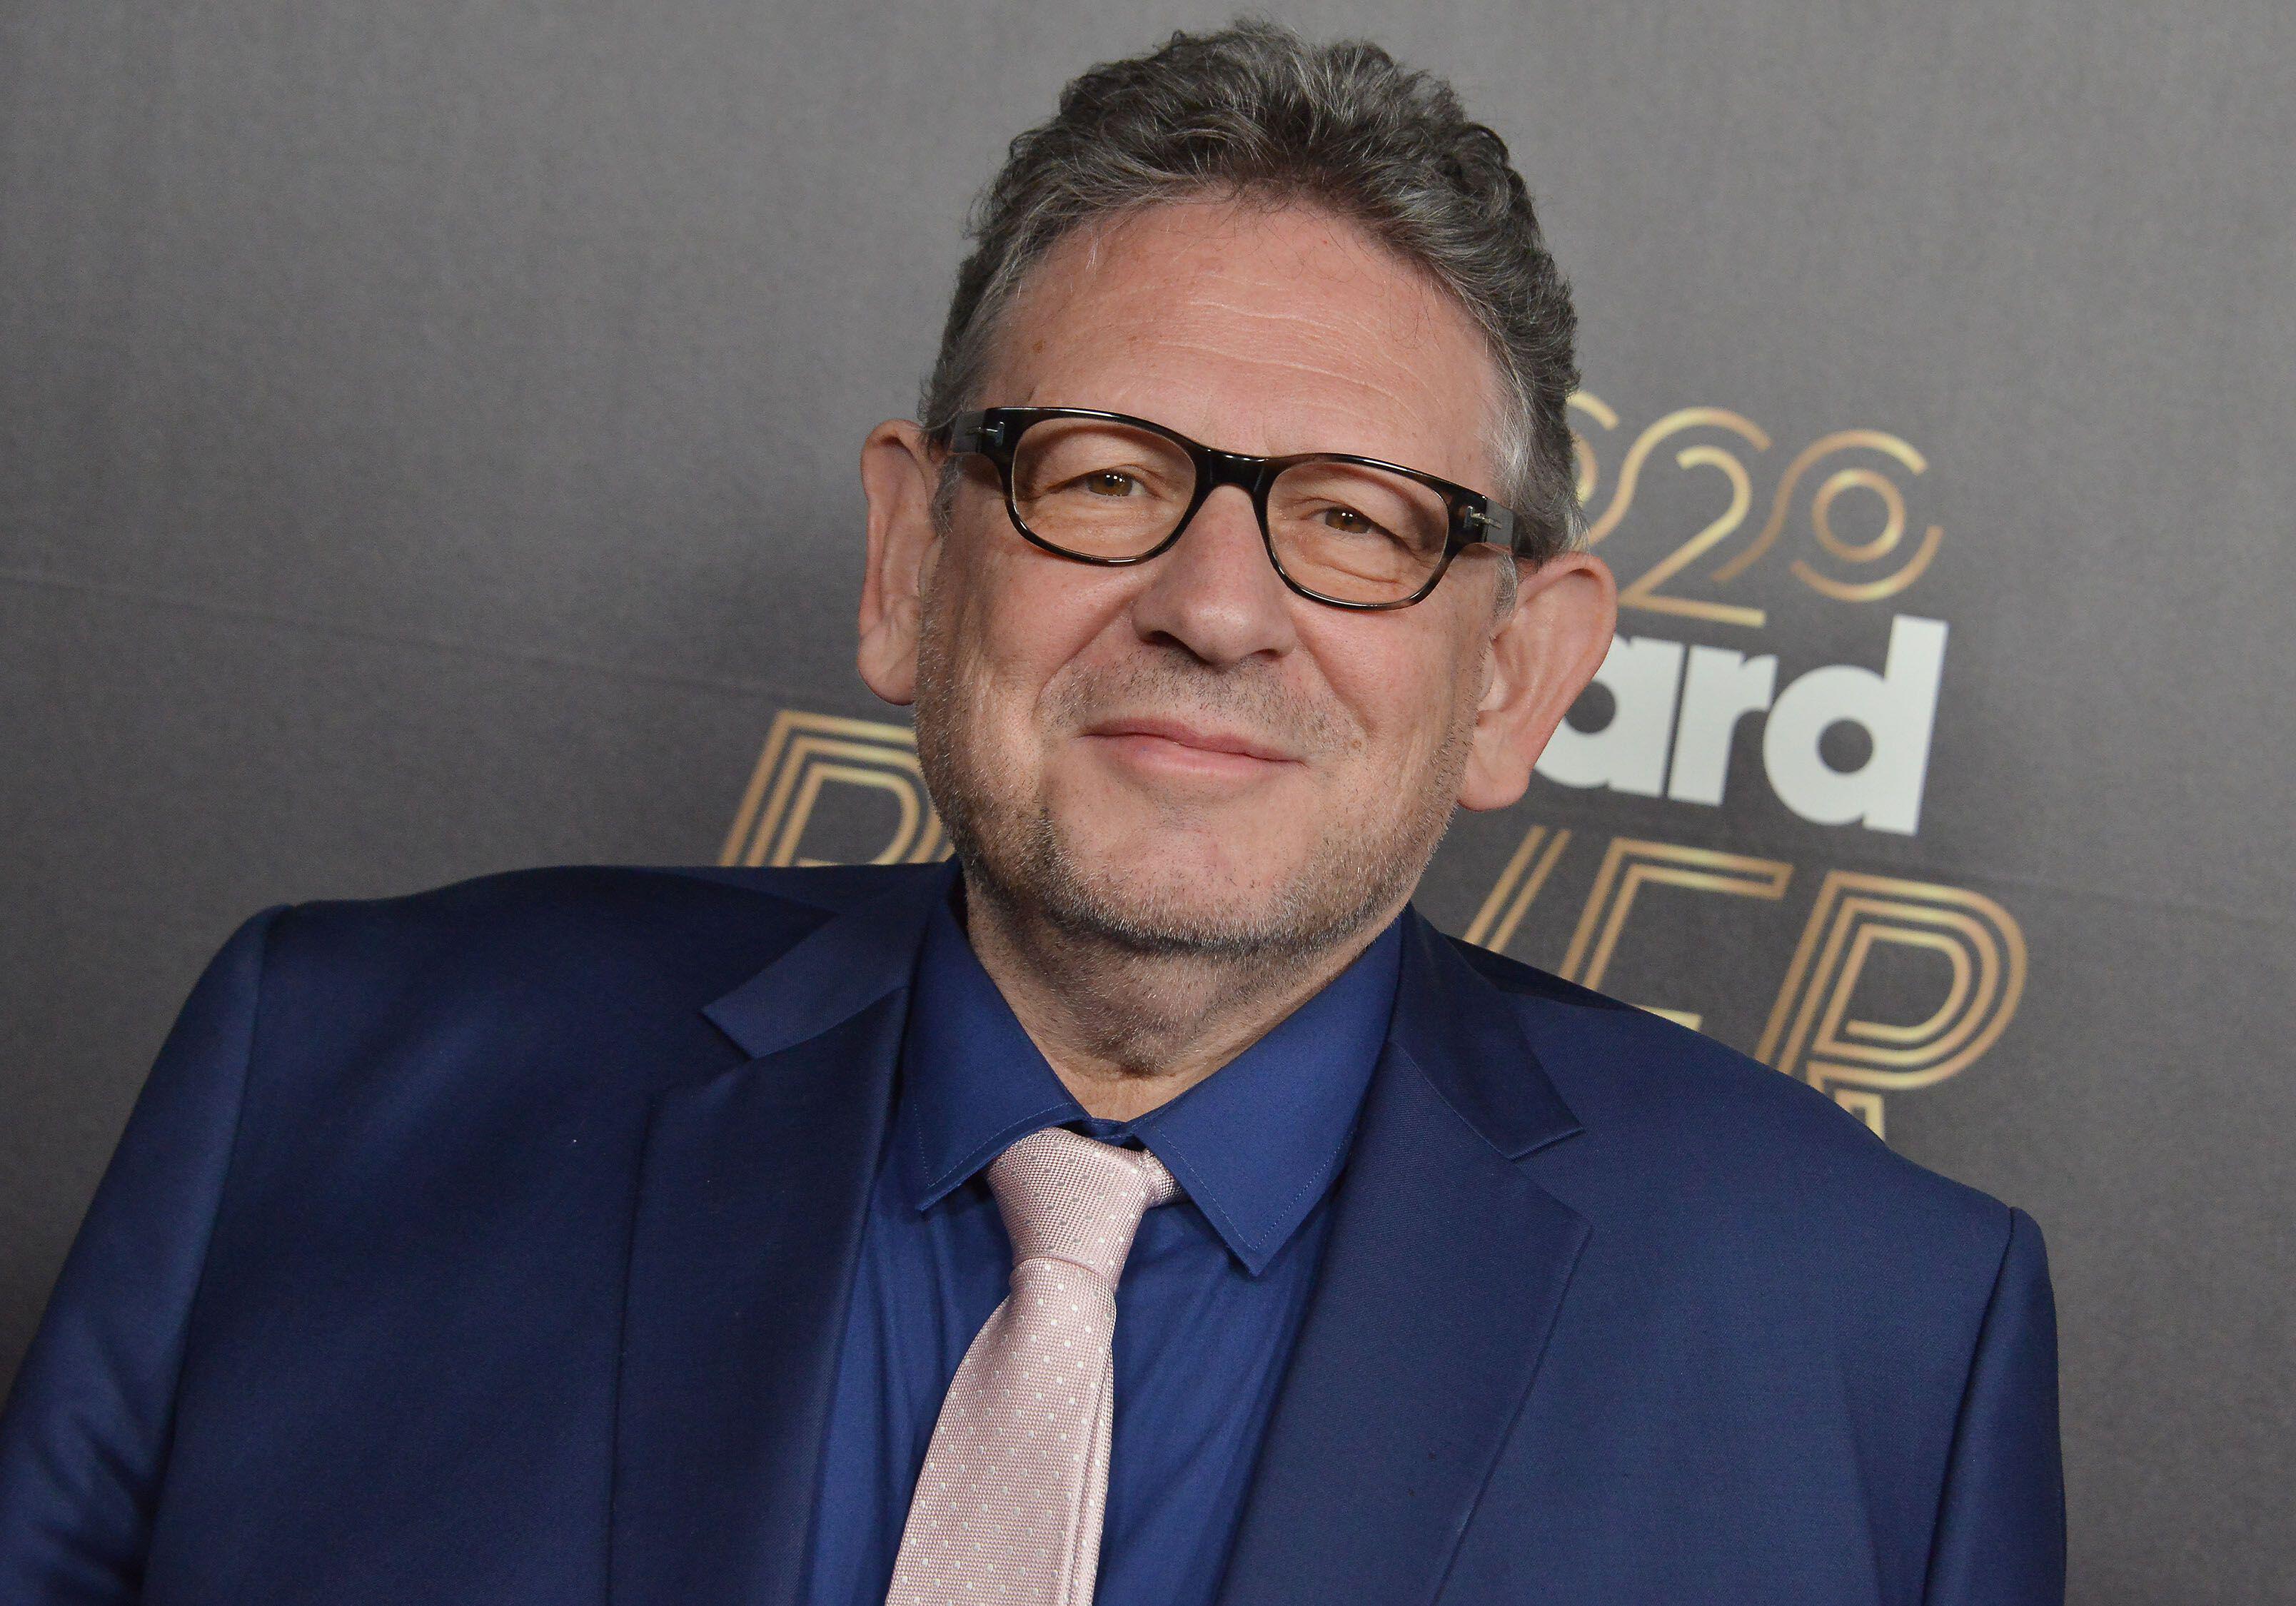 Sir Lucian Grainge on rewarding ‘real’ artists, Universal’s global expansion strategy and more from the company’s Q2 earnings call – Music Business Worldwide